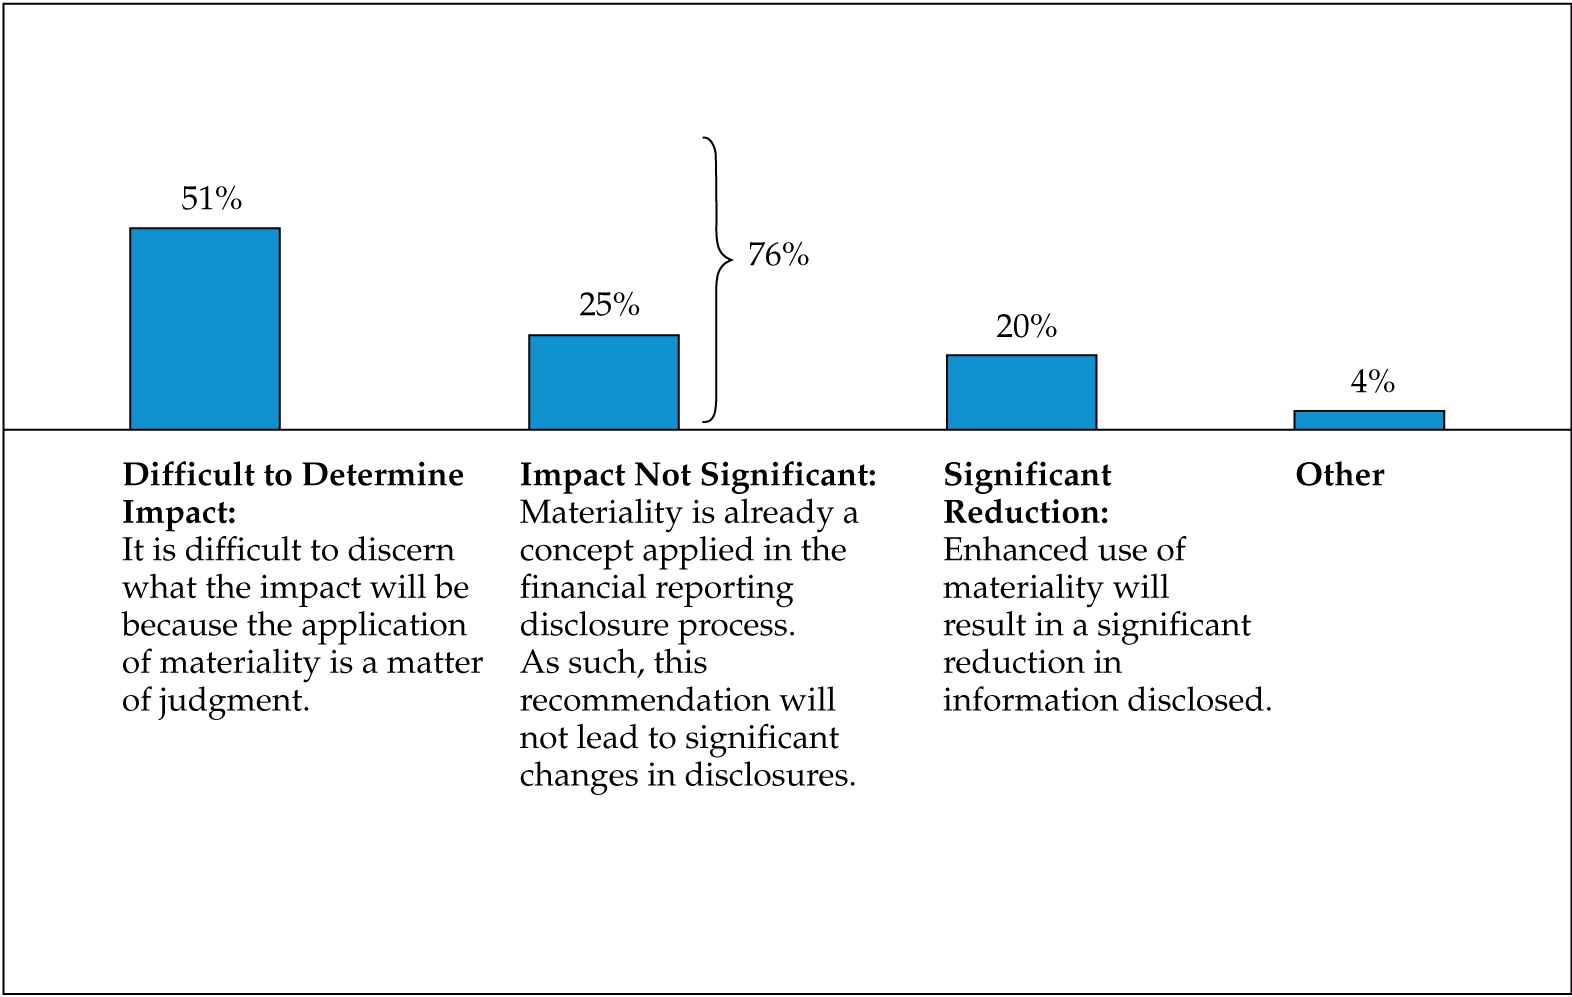 Figure 1. Investors Surveyed See No Obvious Inclusion of Immaterial Information